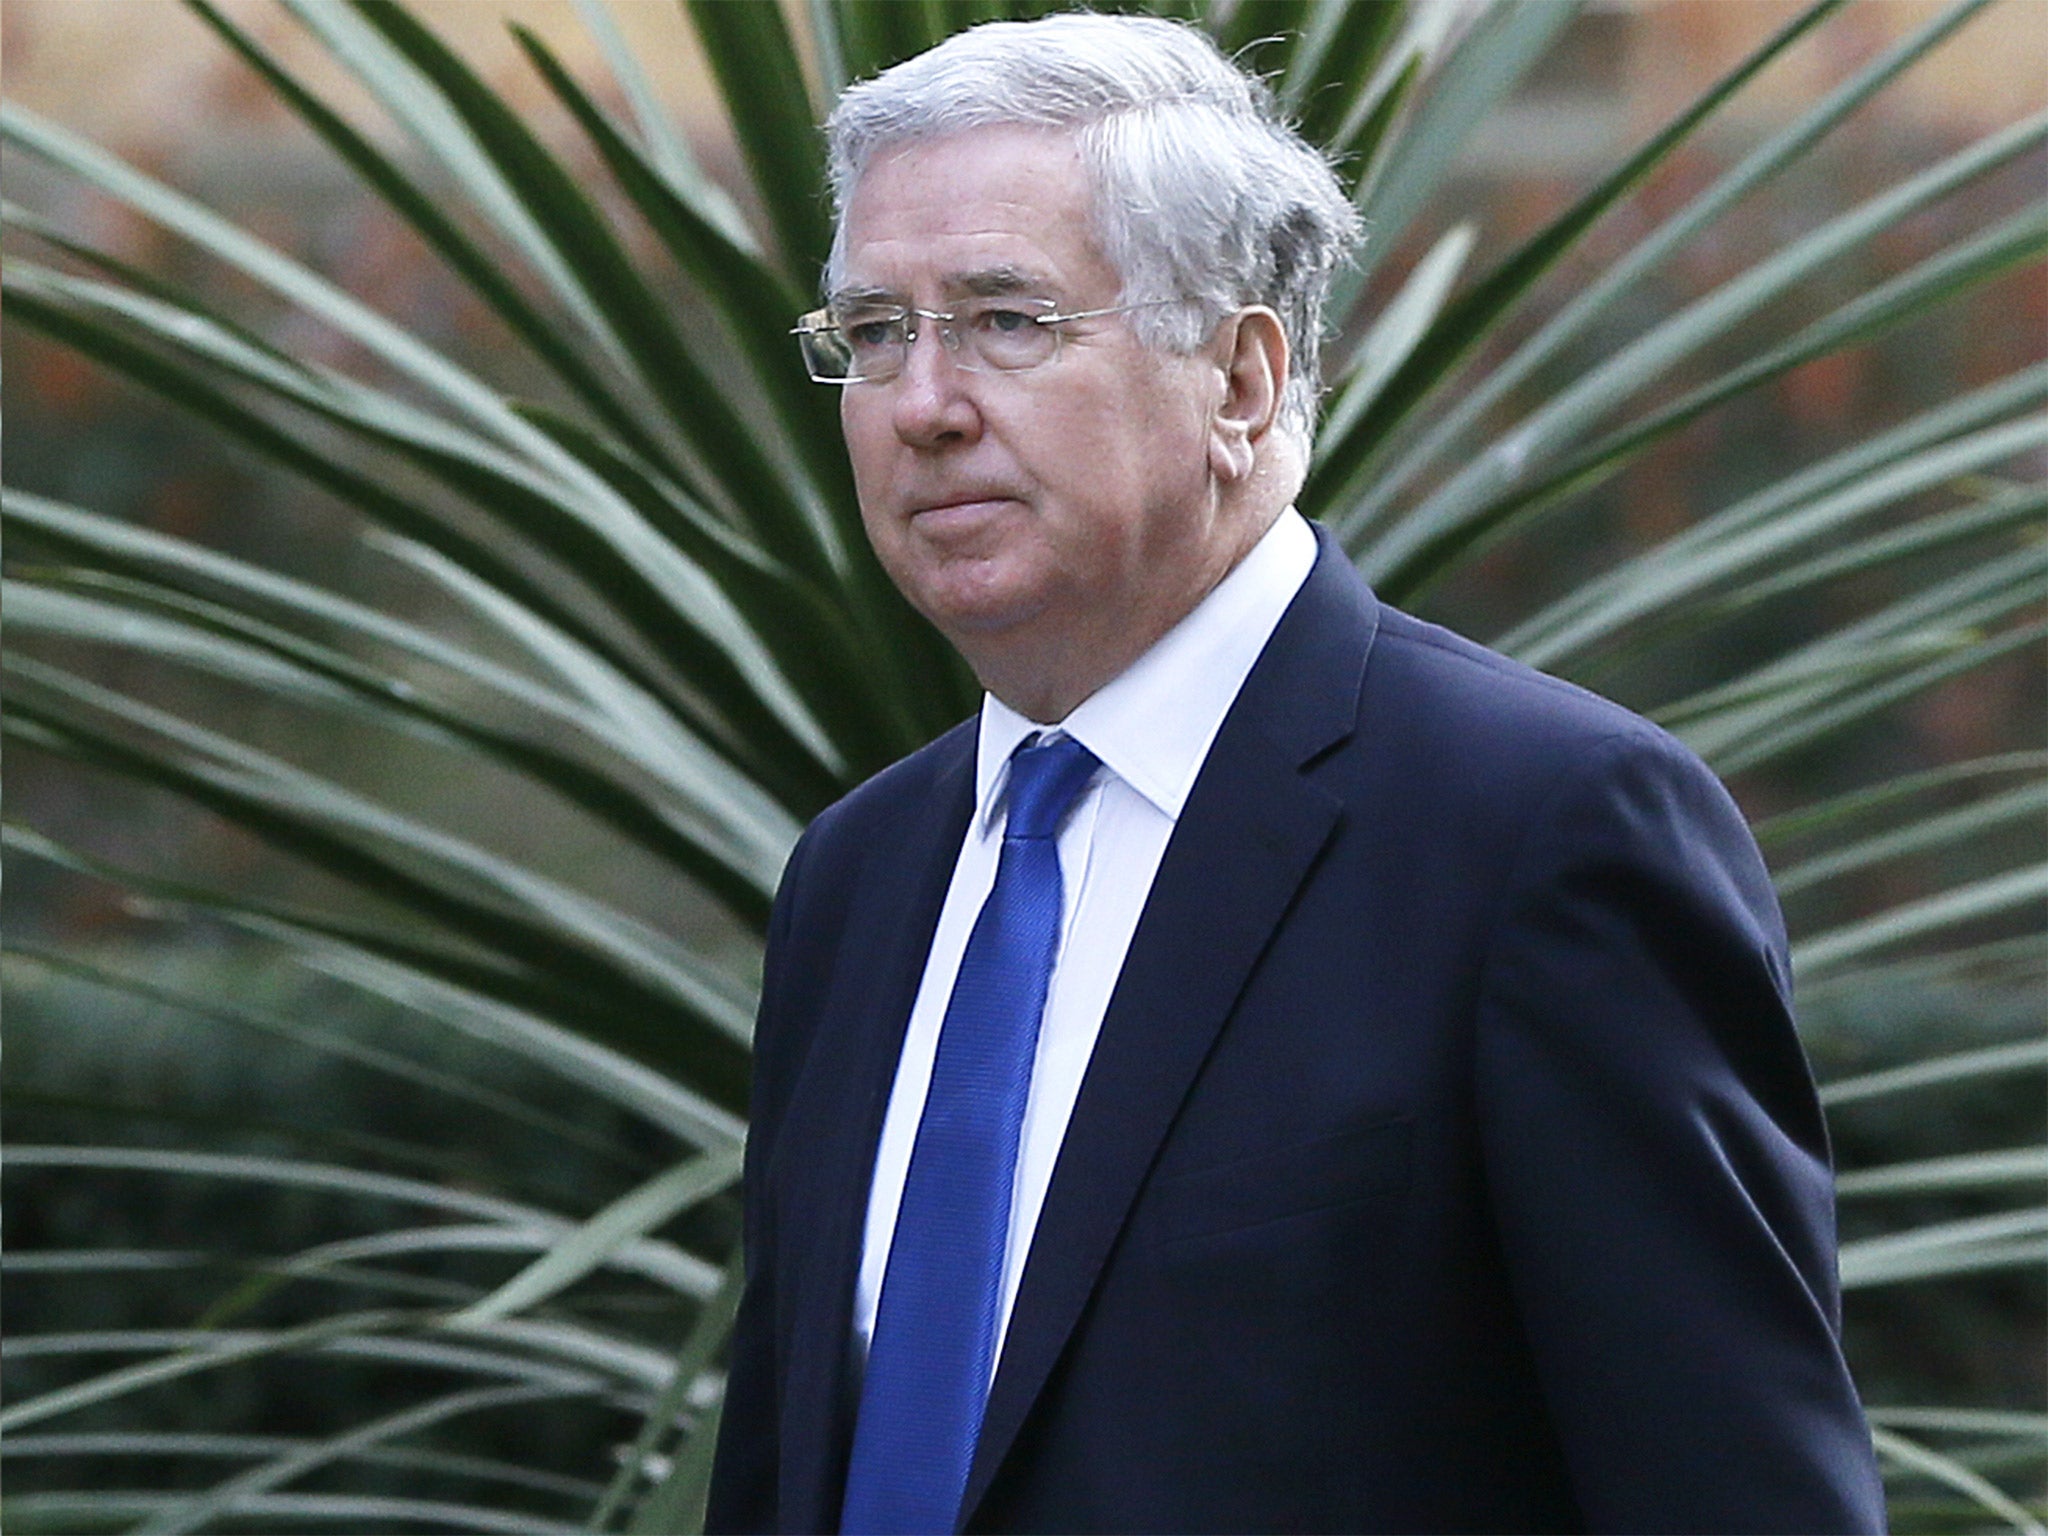 Sir Michael Fallon, the Defence Secretary, was blocking questions in the Commons as the US official was revealing details of the botched test